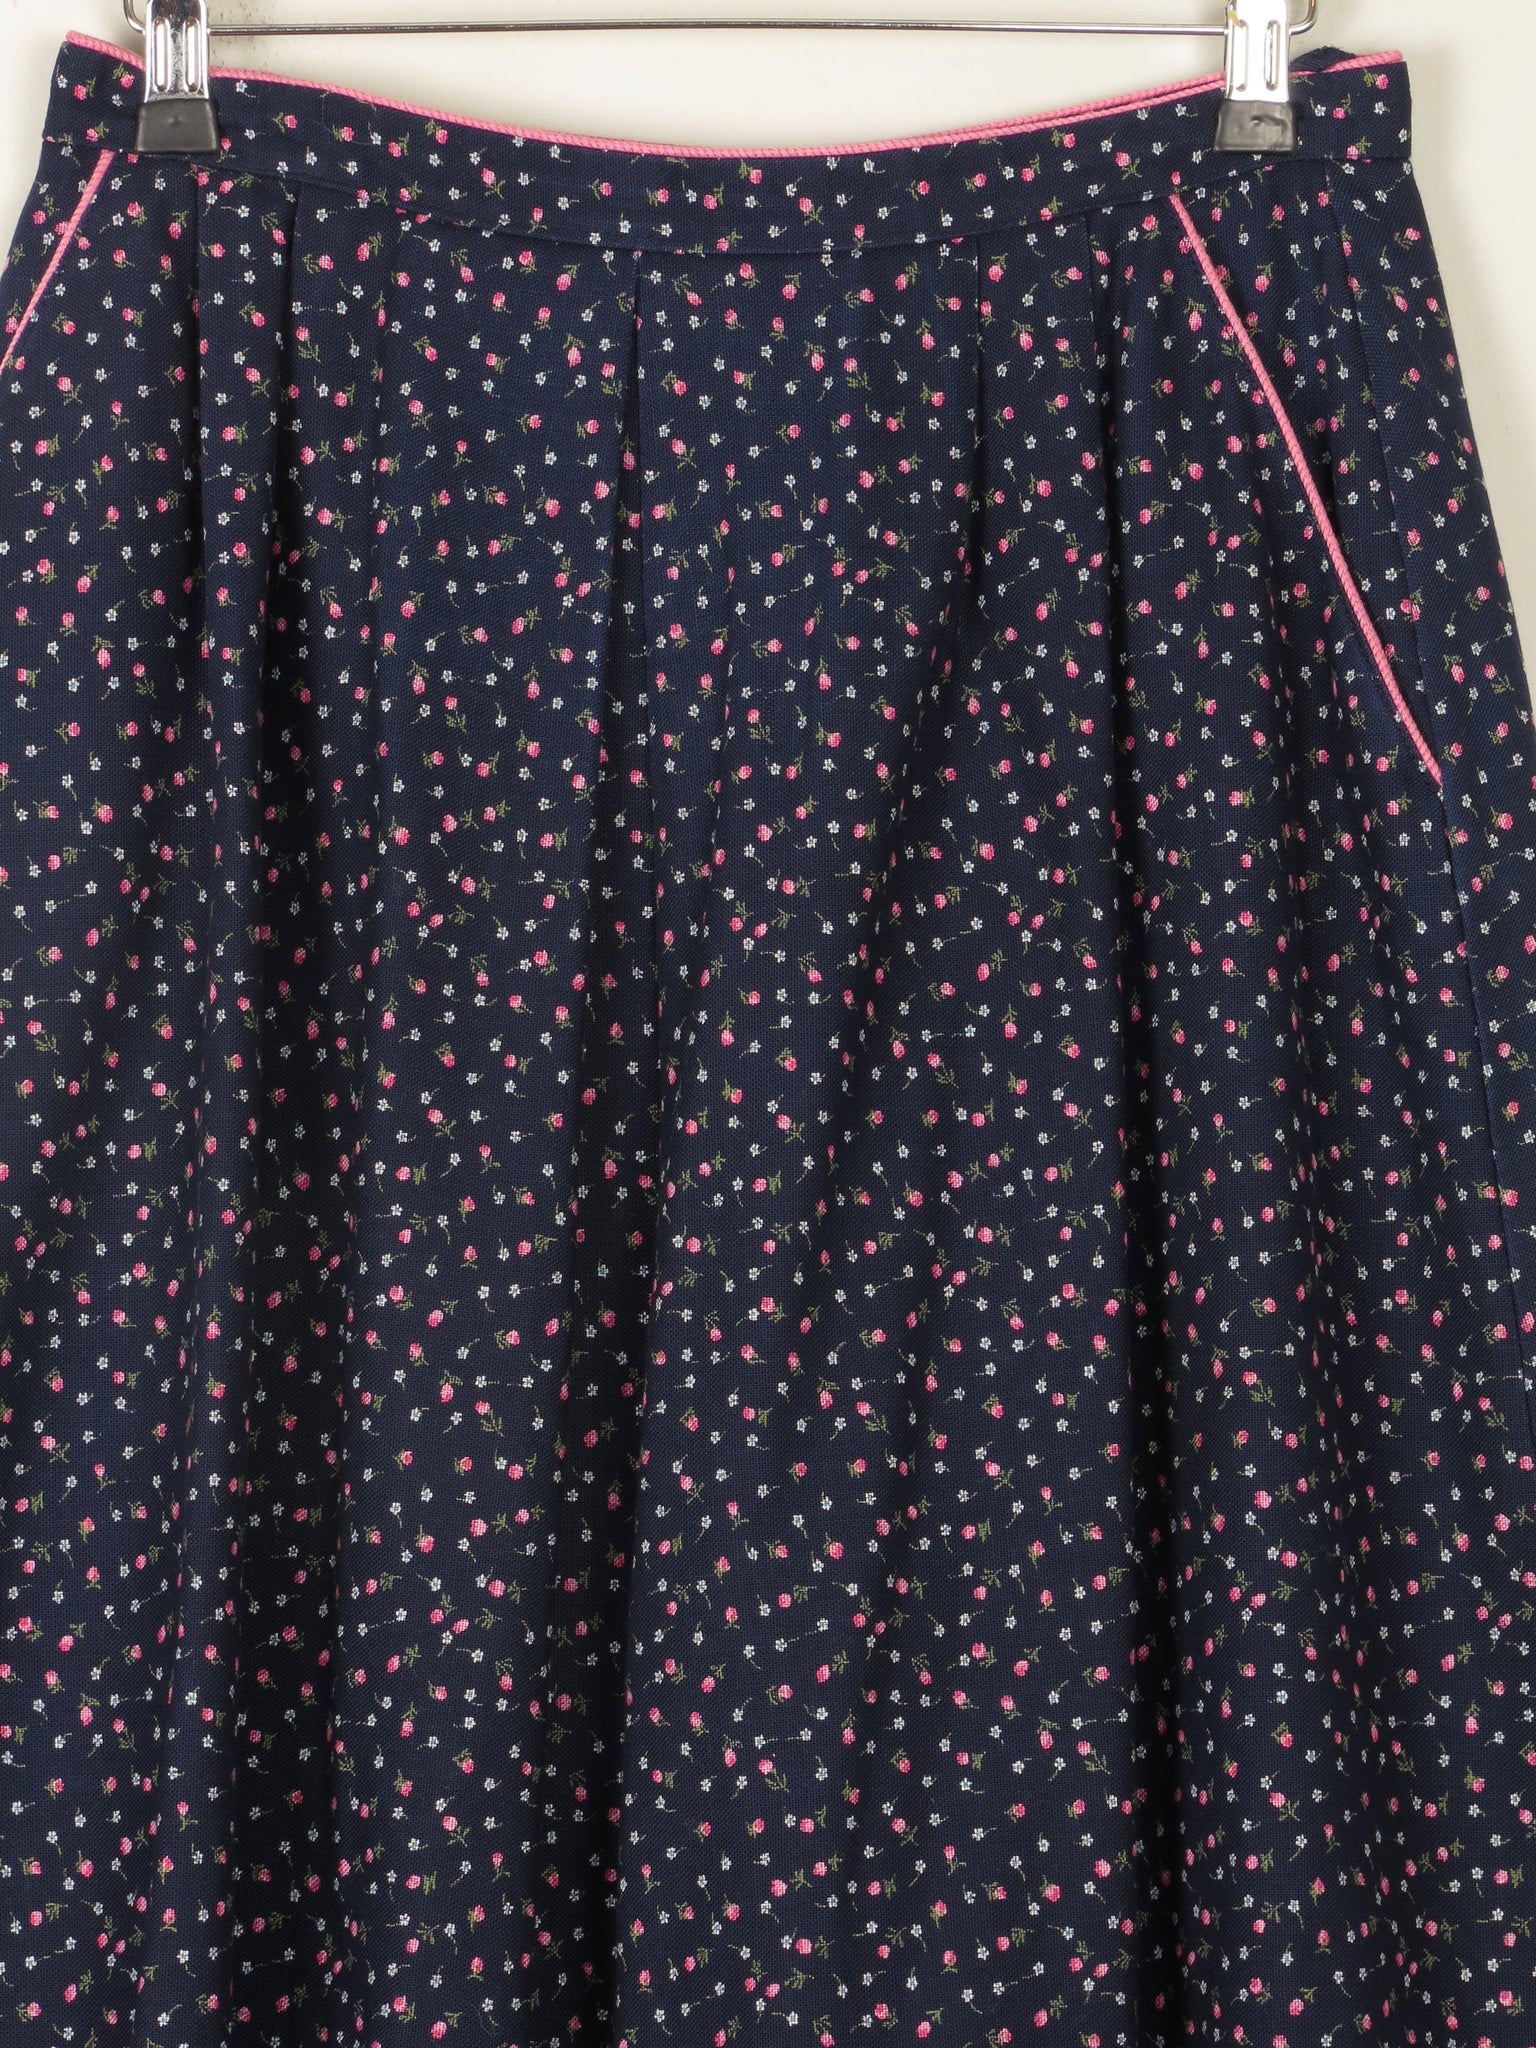 Navy Floral Vintage Prairie Skirt With Pockets 28" 8/10 - The Harlequin